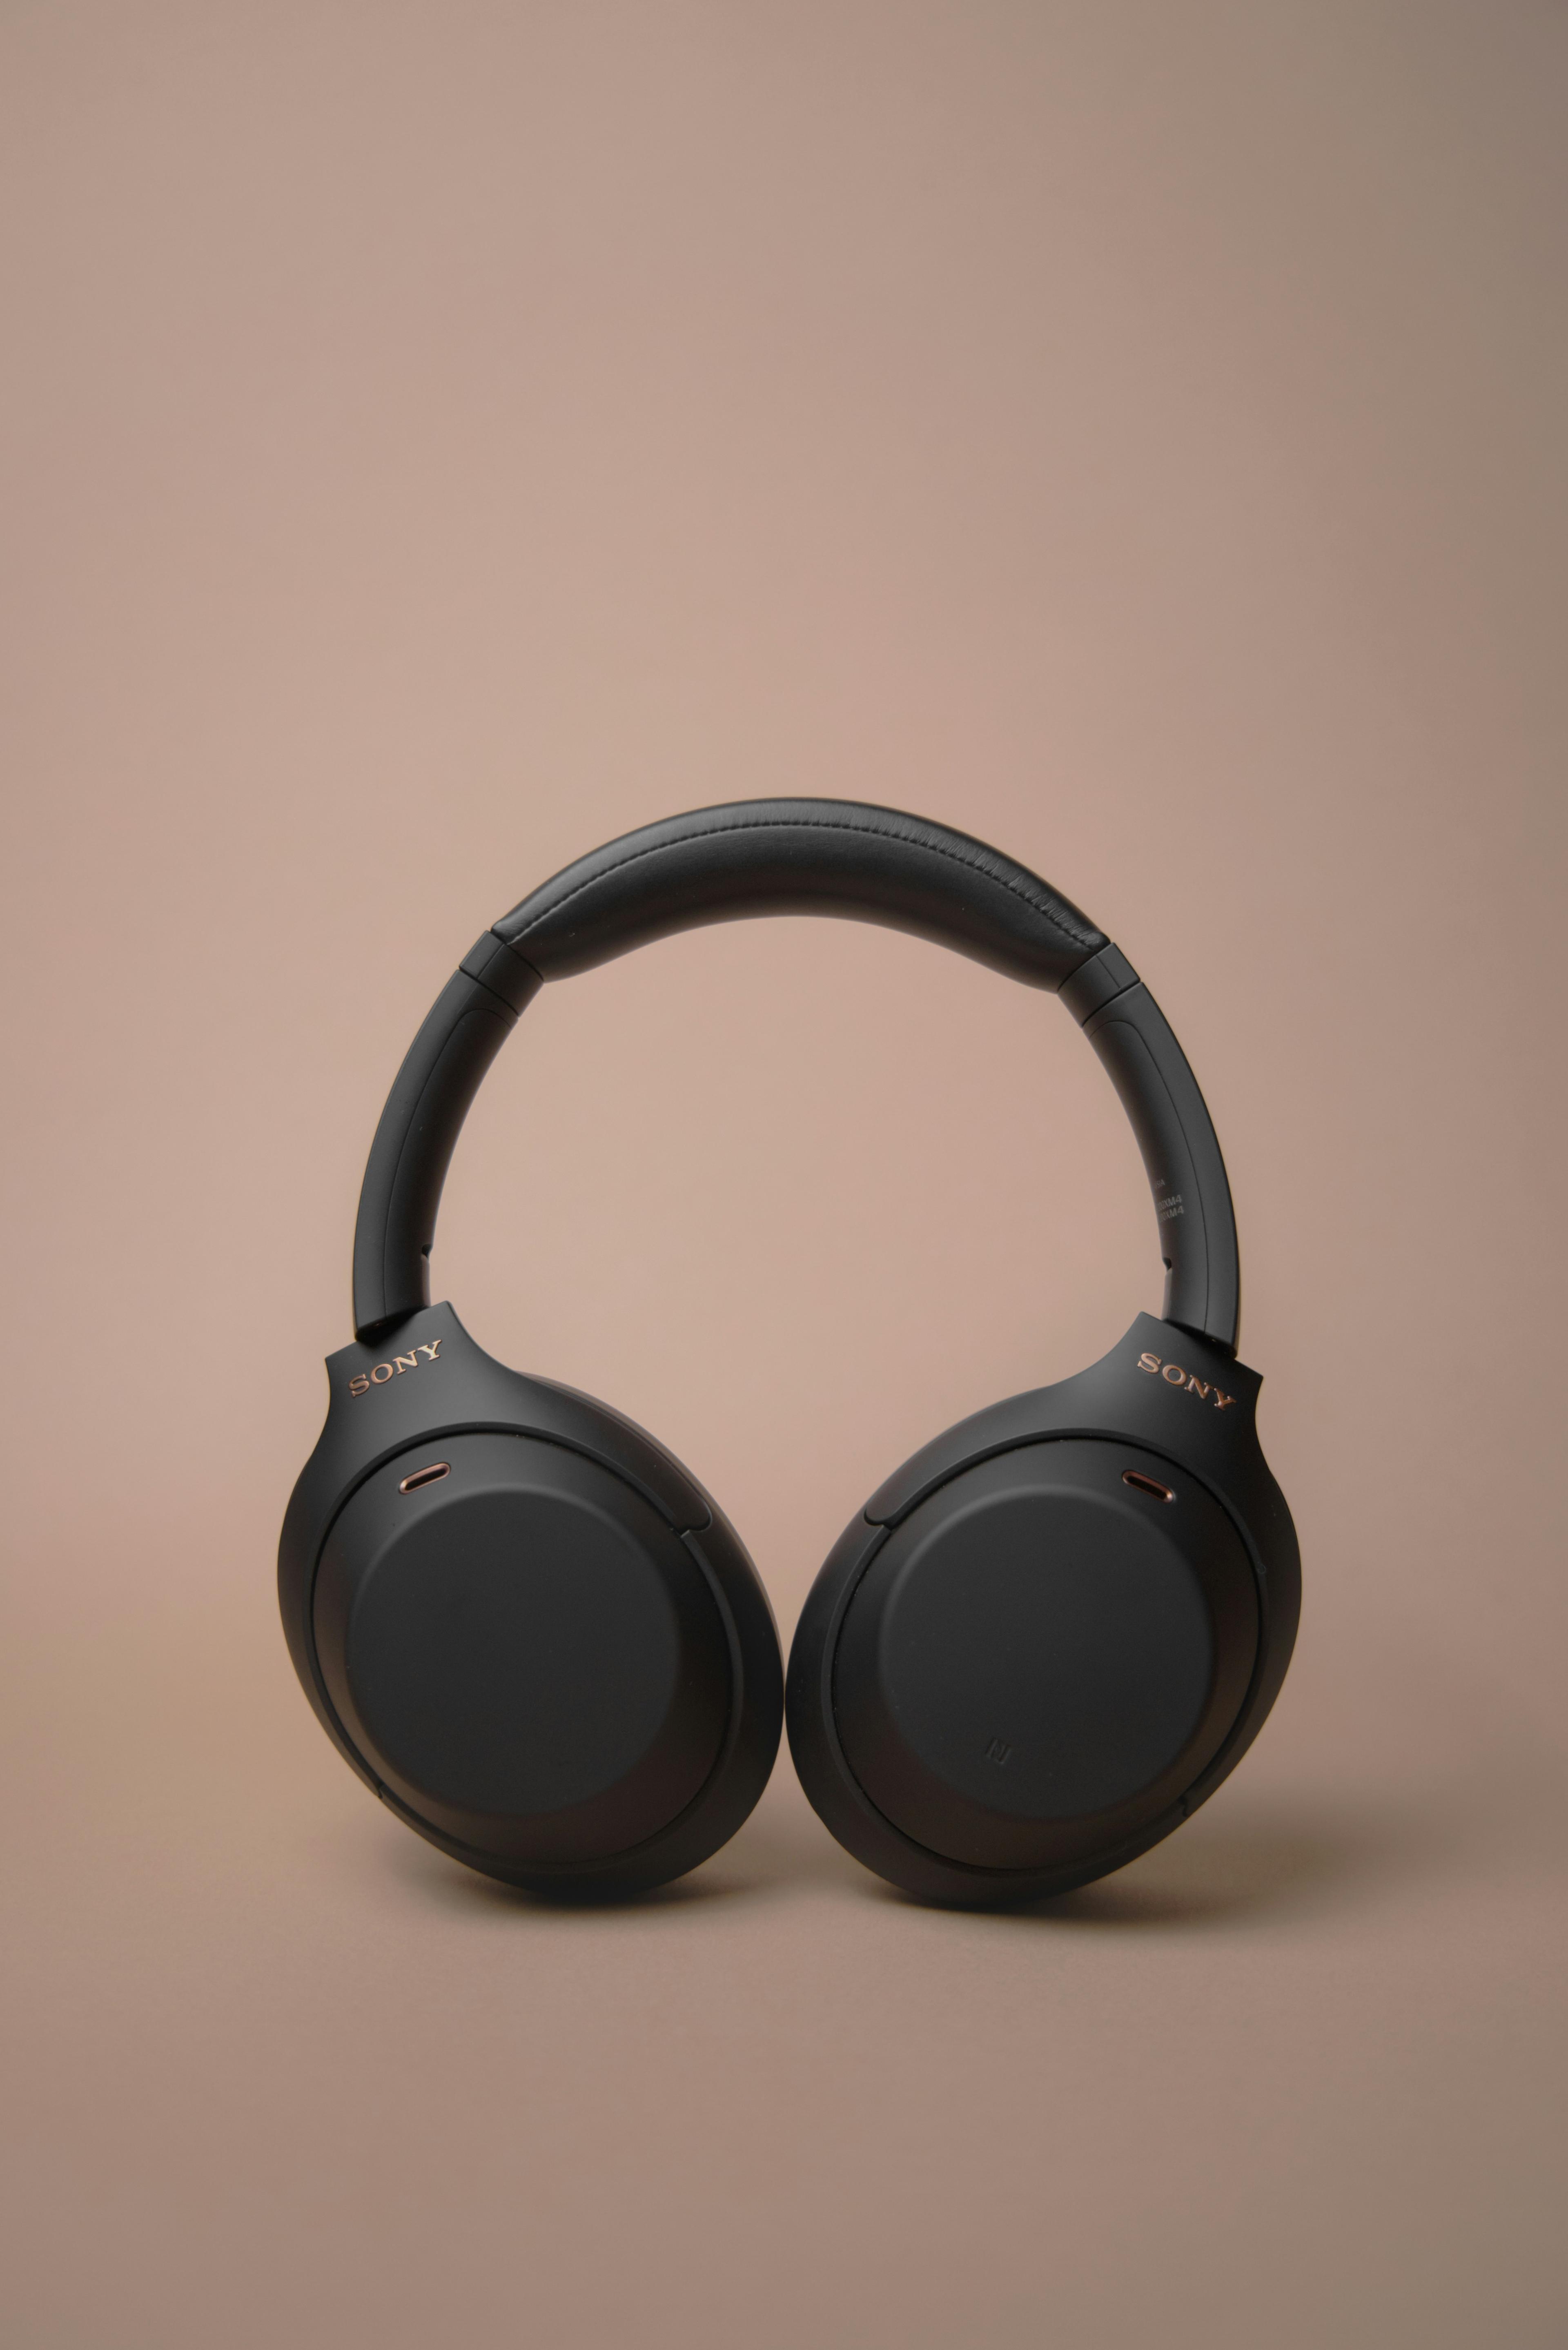 Feel the deep bass with BassBoom 500. These wireless on-ear headphones deliver powerful sound with enhanced low frequencies. The foldable design and soft ear cushions provide comfort and portability. With Bluetooth connectivity and a built-in microphone, you can enjoy wireless music and take calls with ease.